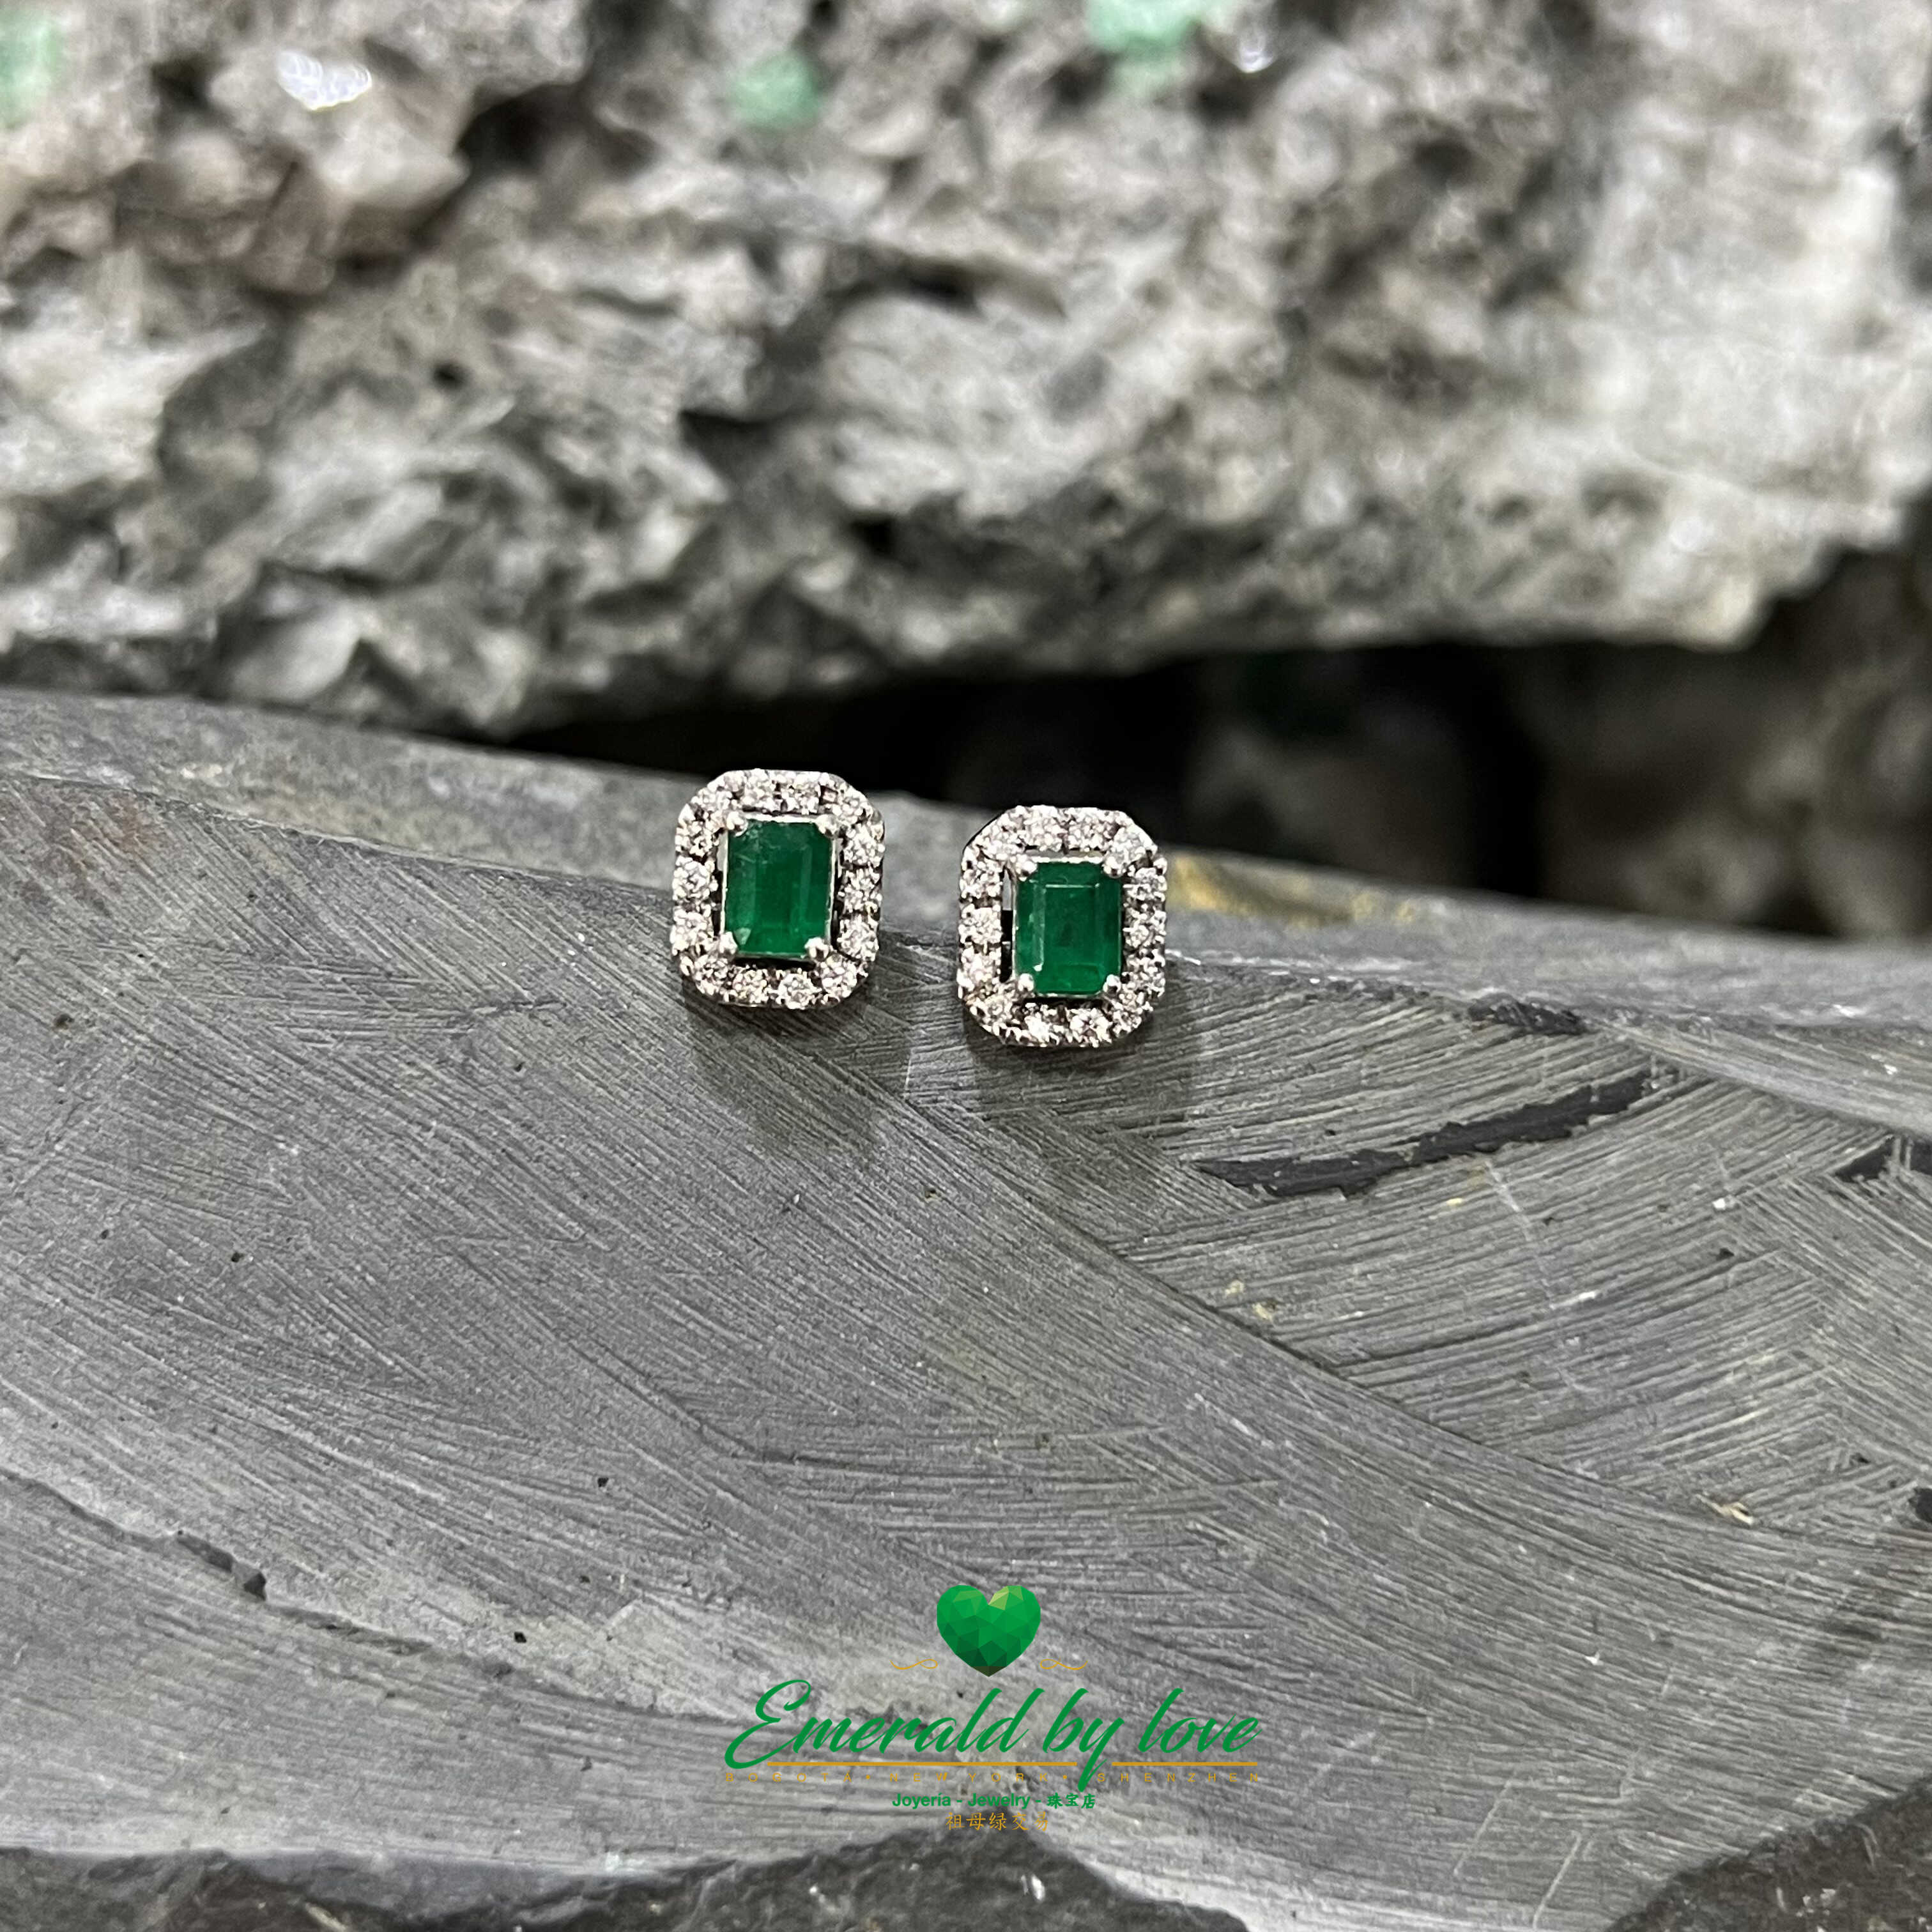 Regal Marquise White Gold Earrings with 1.10 Ct Emerald Cut Emeralds and 0.28 Ct Diamonds